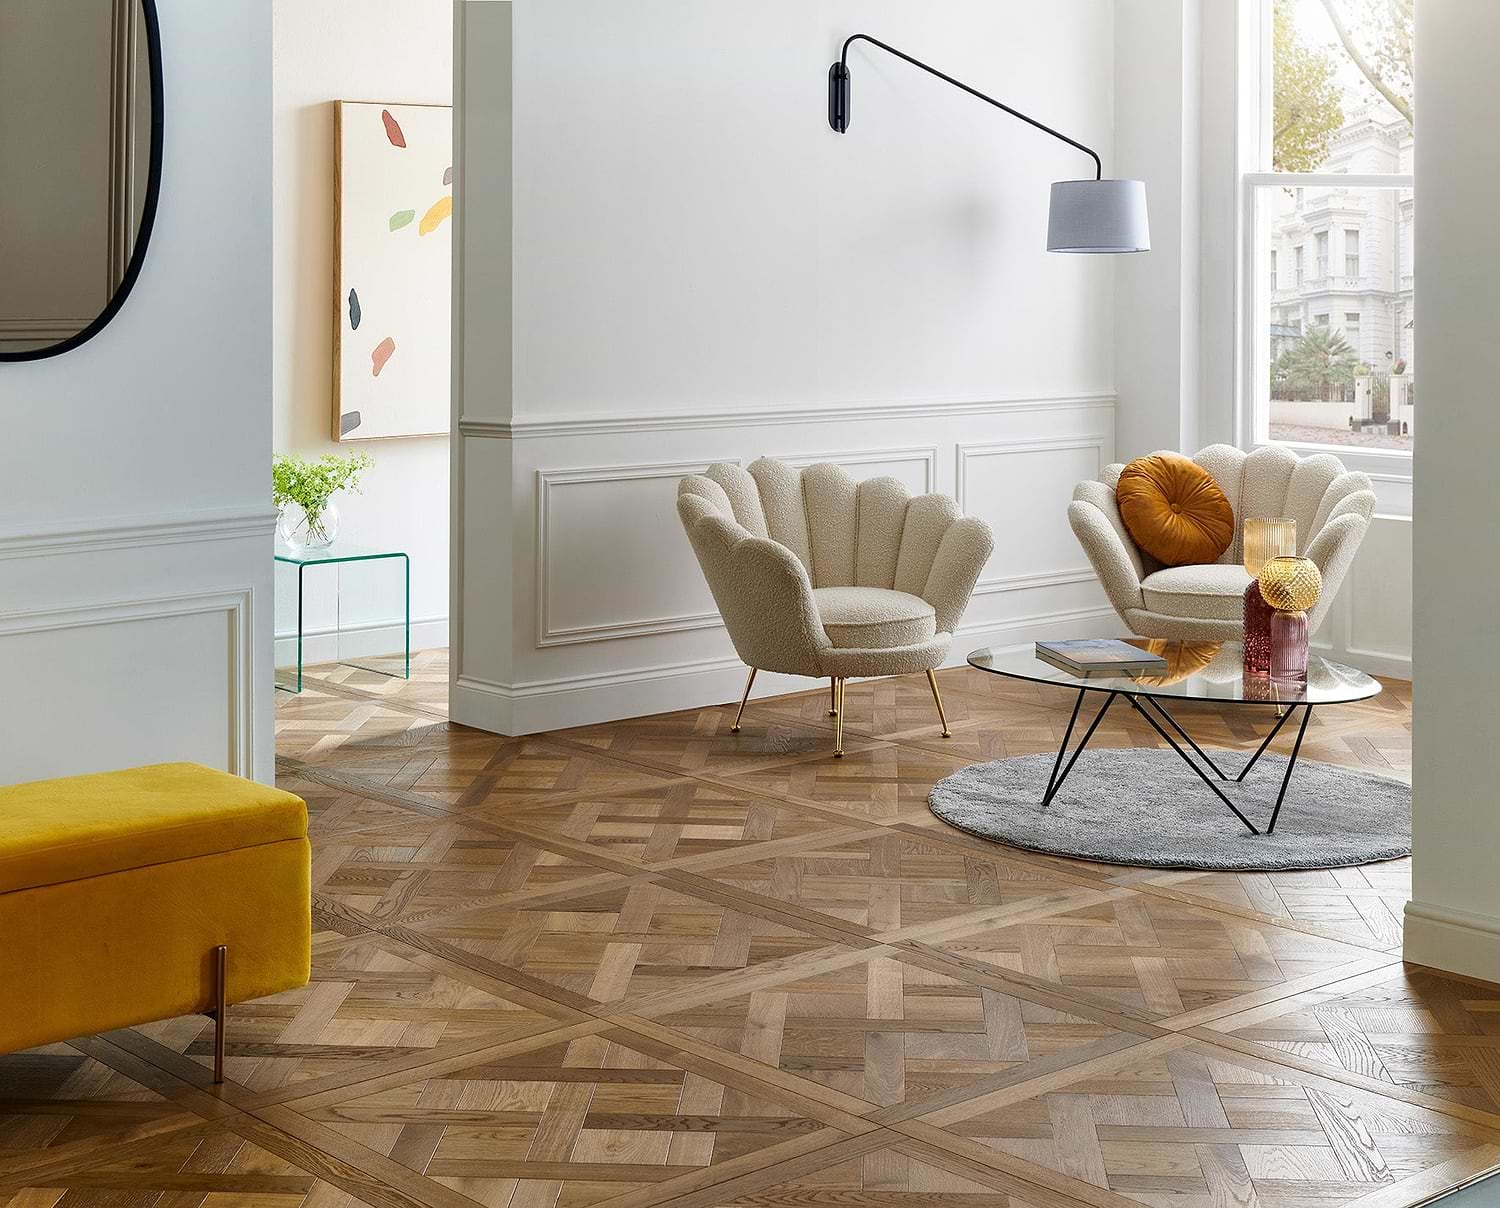 How to pick the best parquet flooring - Hyperion Tiles